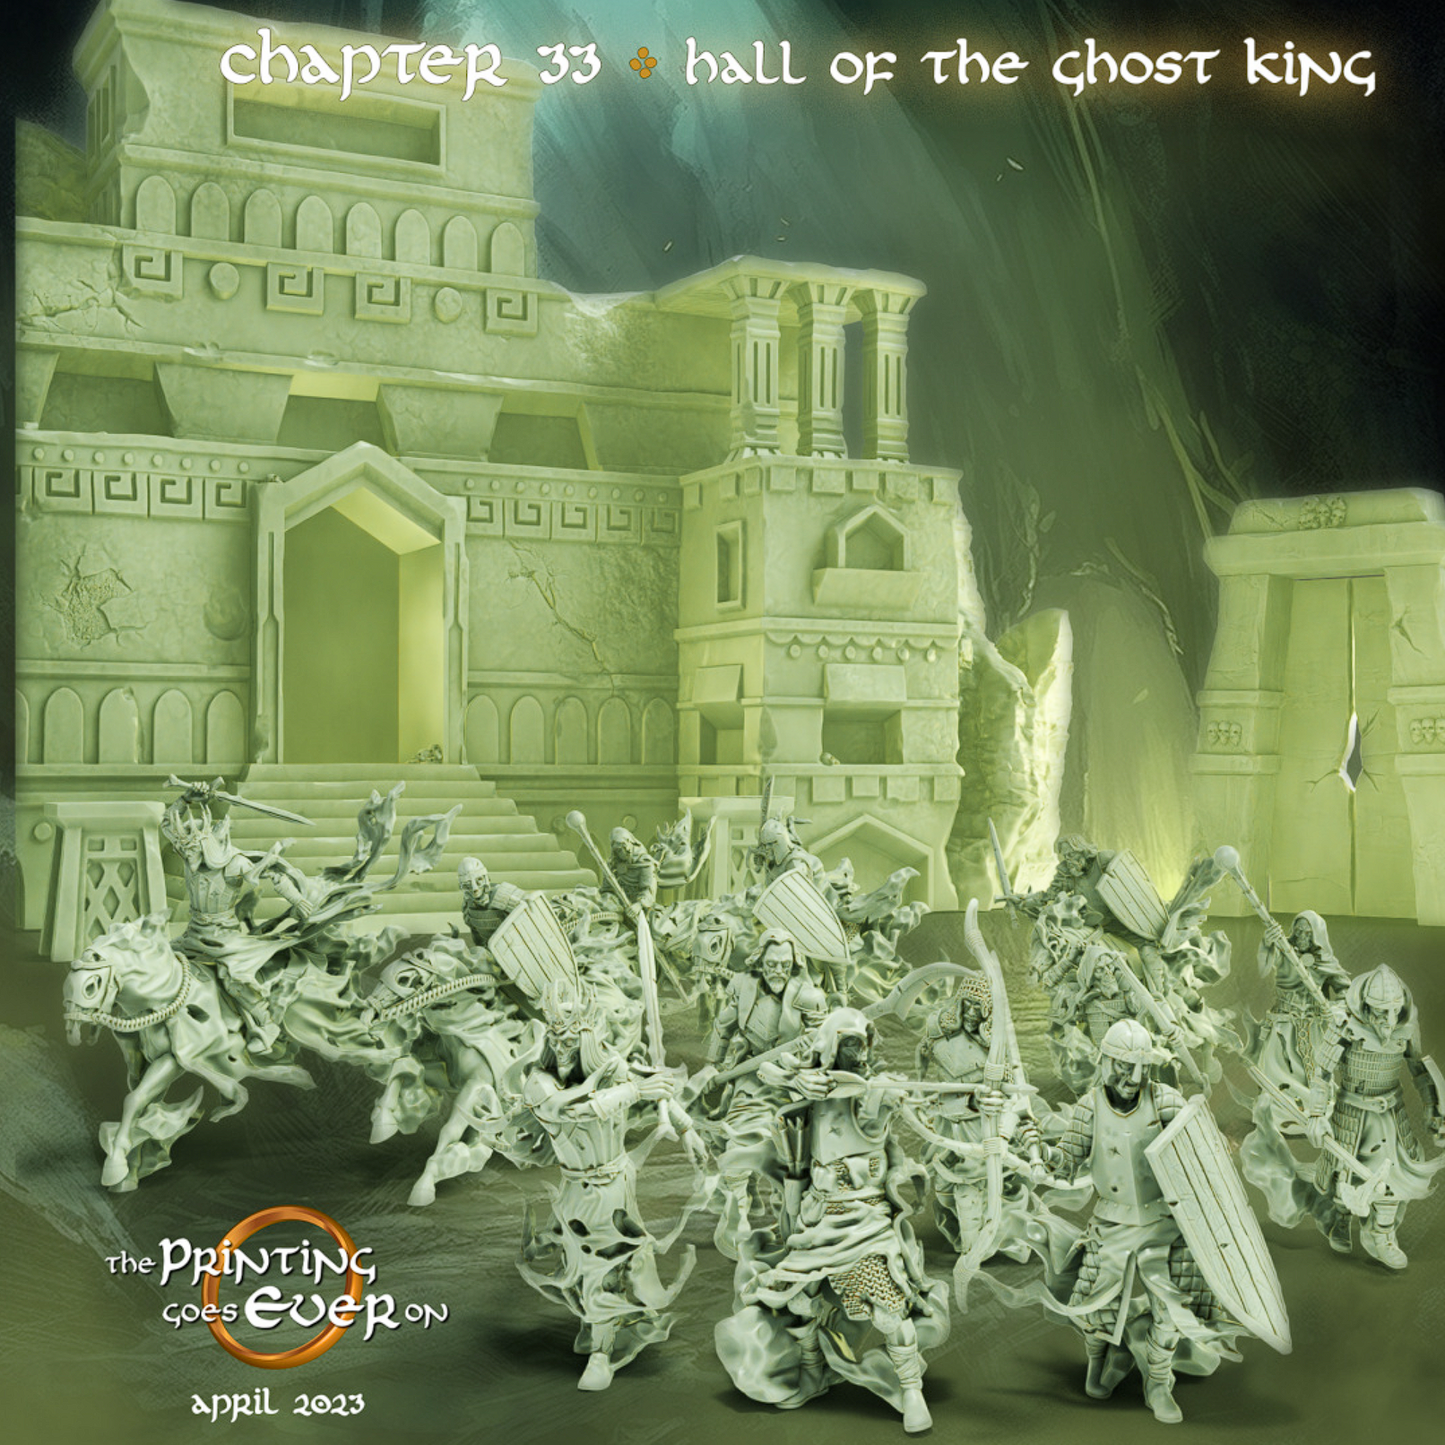 Complete Pack Chapitre 33 Hall of the Ghost King